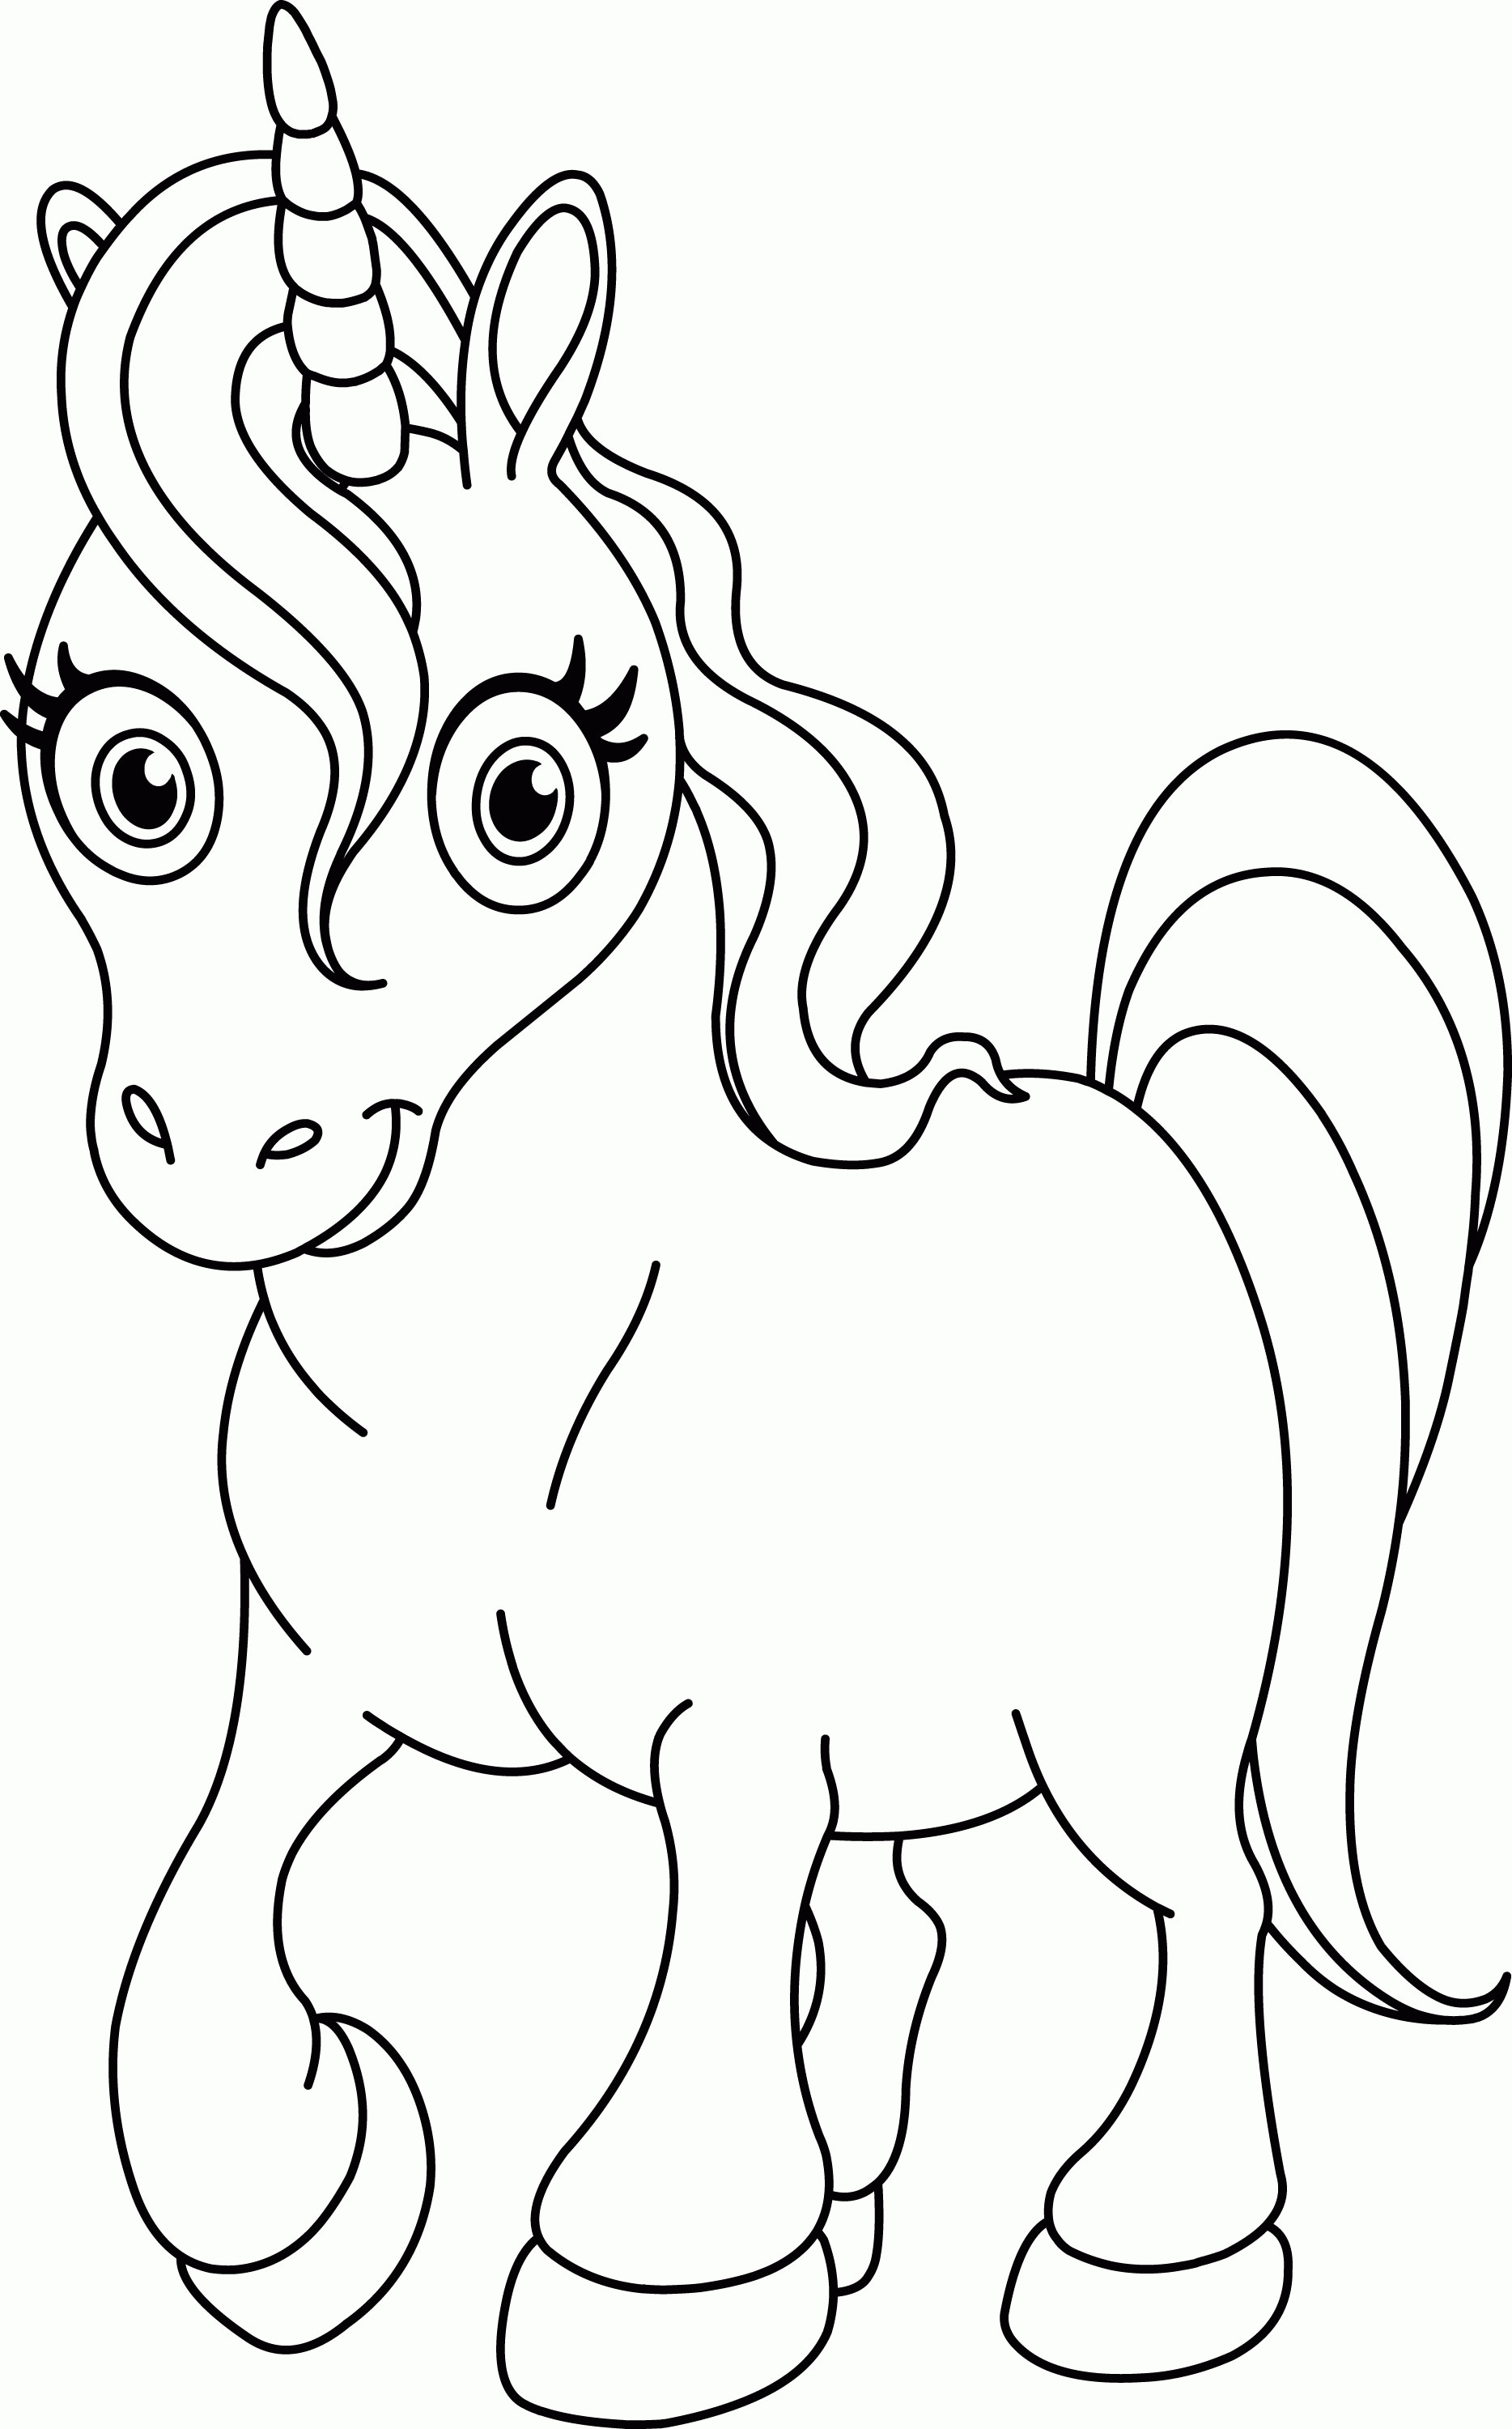 Printable Unicorn Coloring Pages
 Pink Fluffy Unicorns Dancing Rainbows Coloring Pages